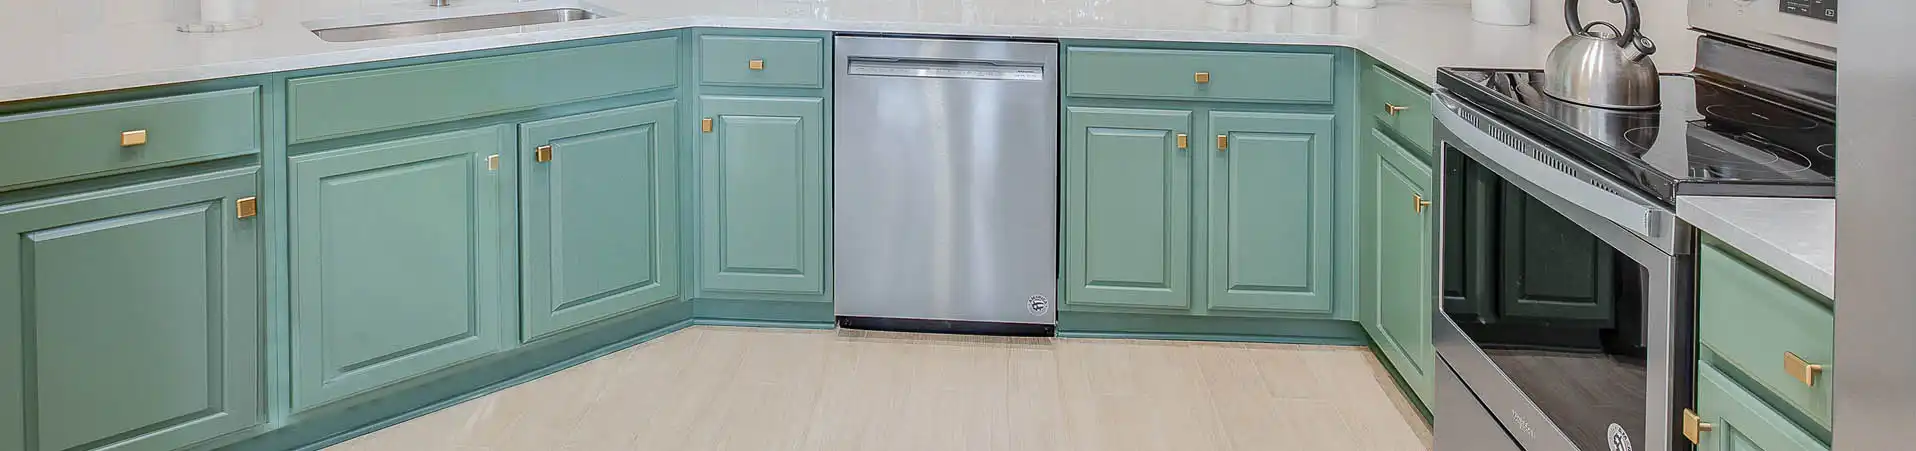 Photo of kitchen with custom sage green paint color